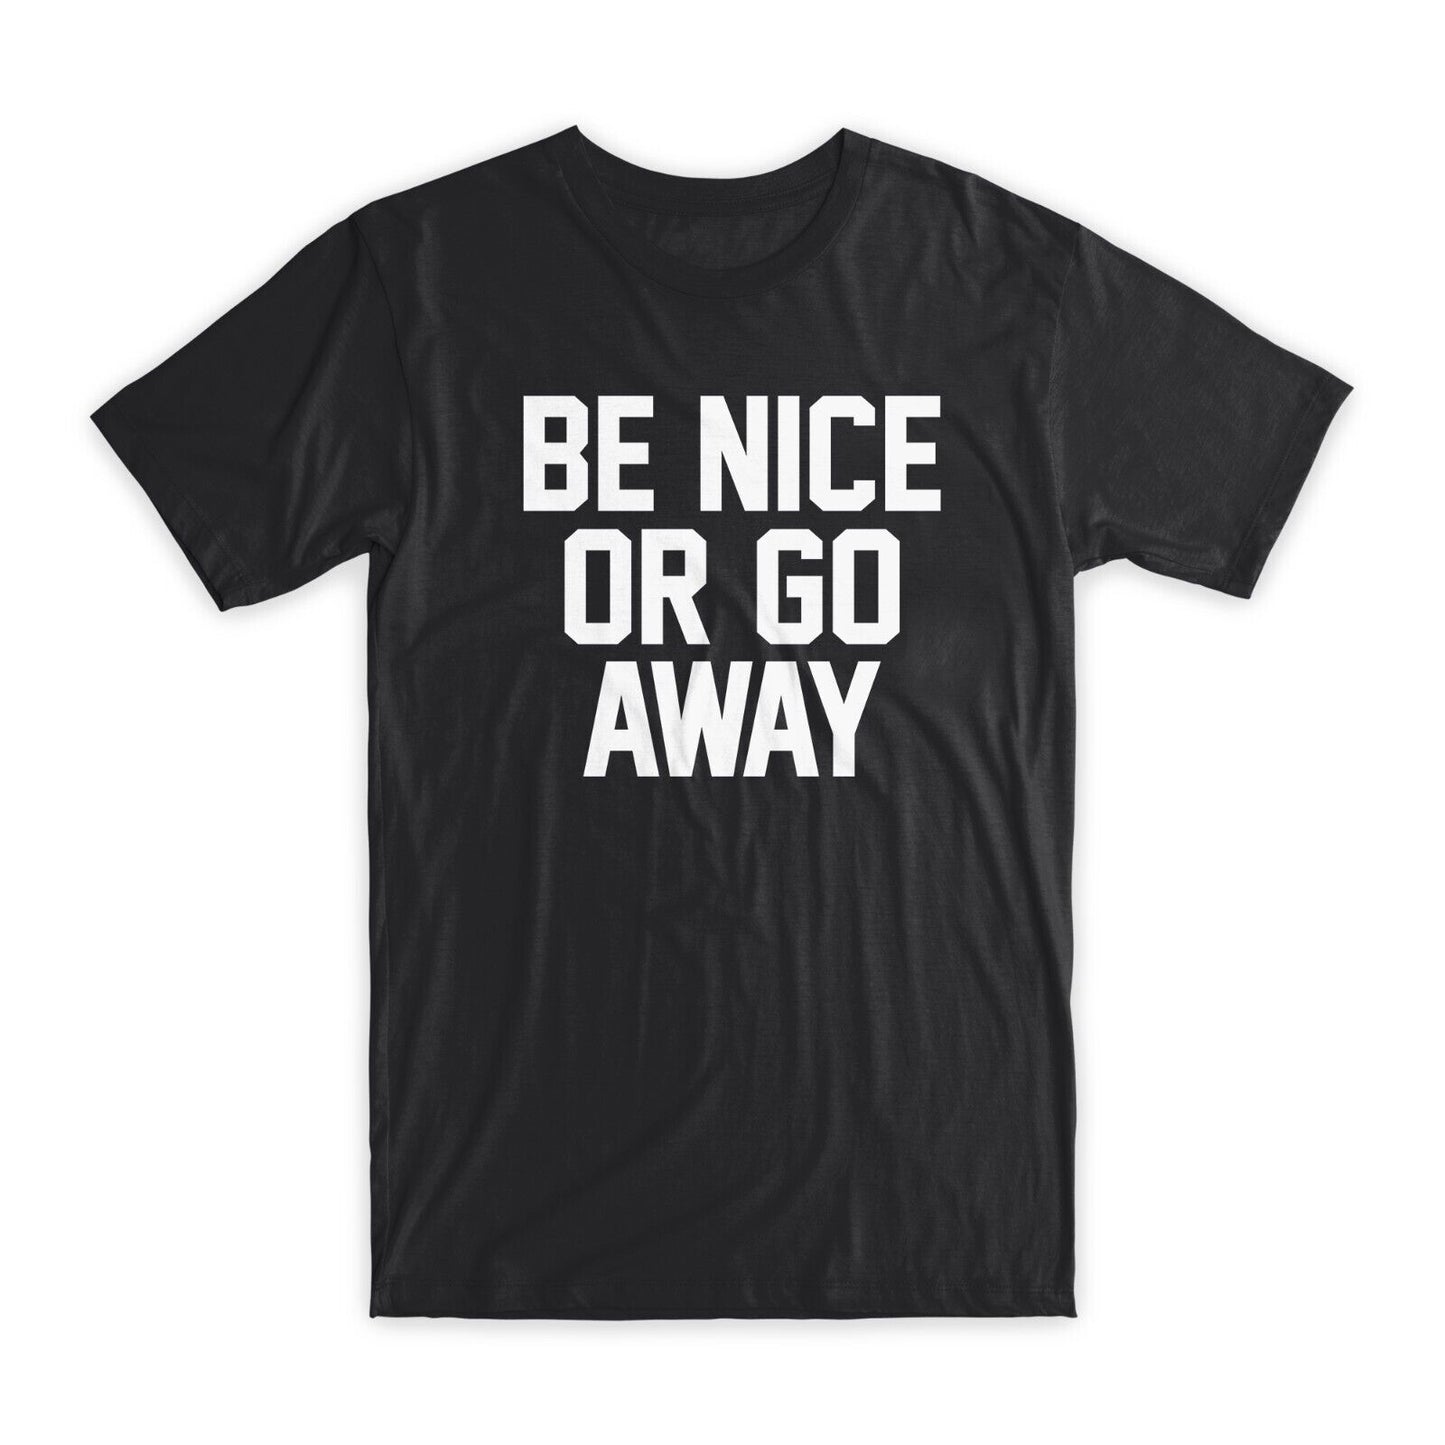 Be Nice or Go Away T-Shirt Premium Soft Cotton Crew Neck Funny Tees Gifts NEW